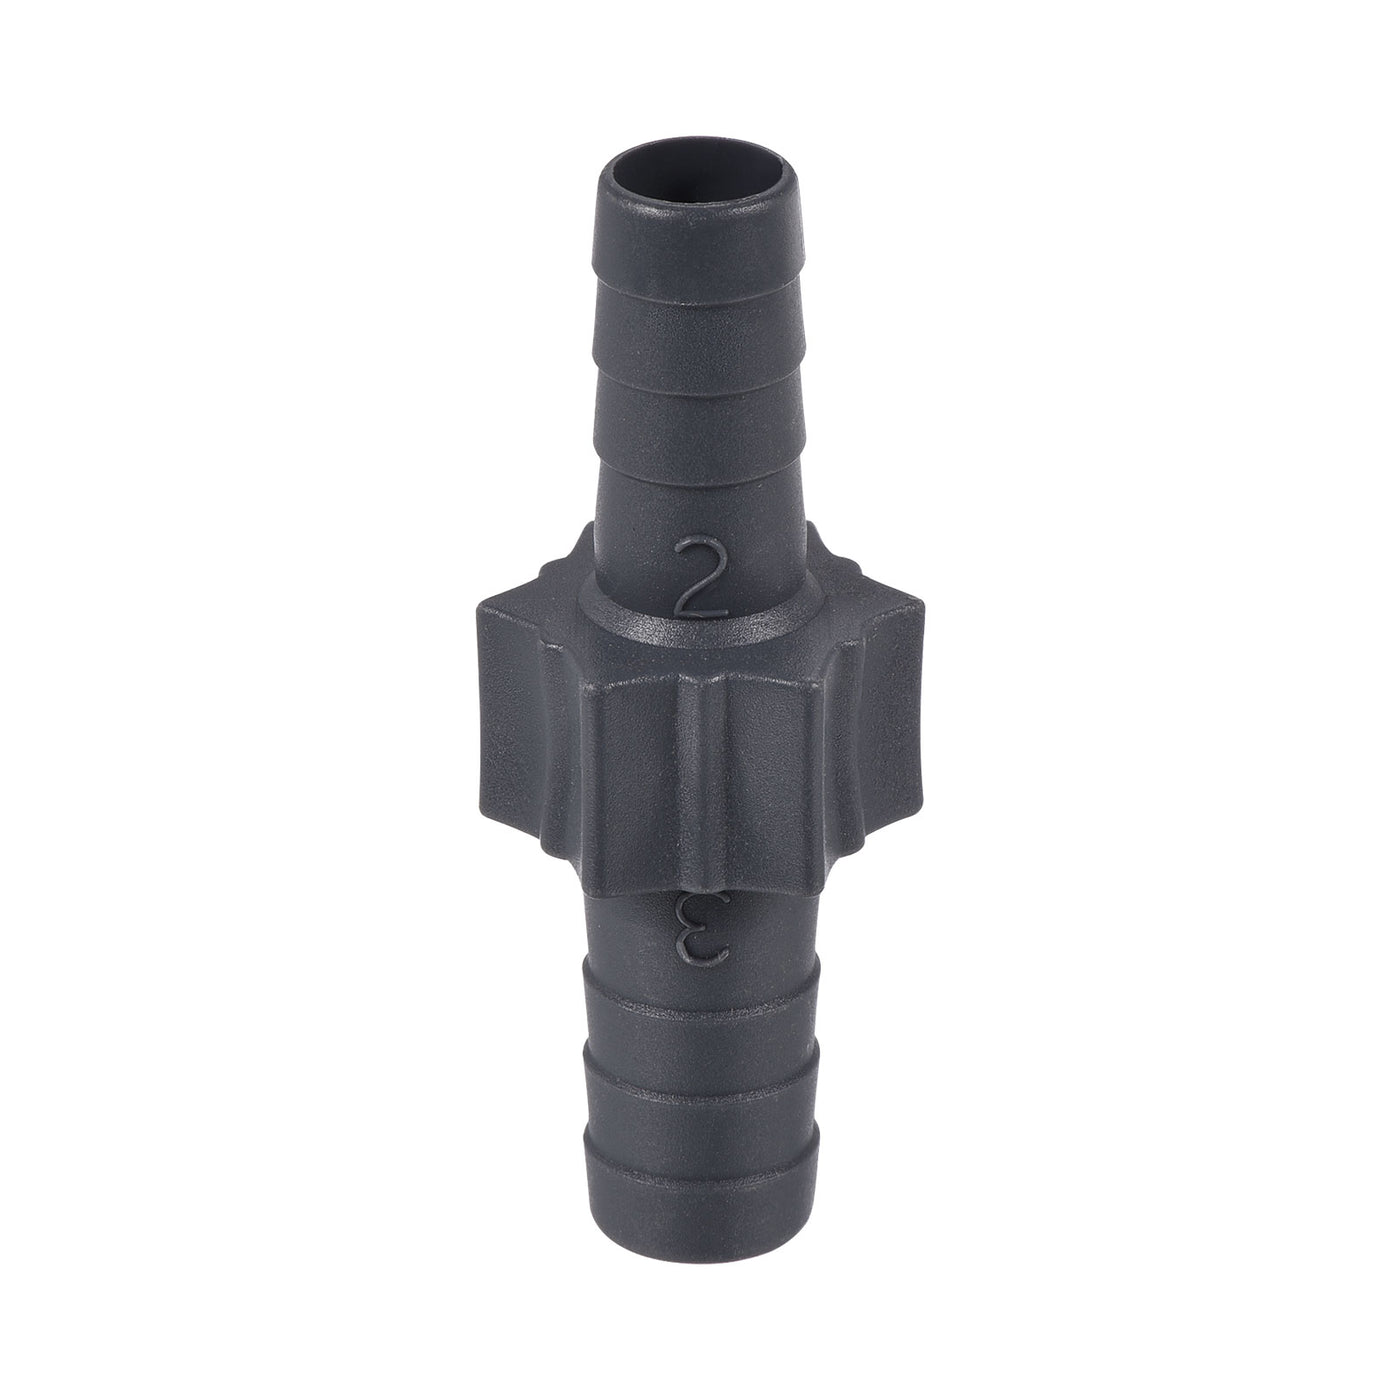 Harfington Barb Hose Fitting 14mm to 12mm Straight Coupler Quick Connector Adapter for Water Fuel Air Oil Gas